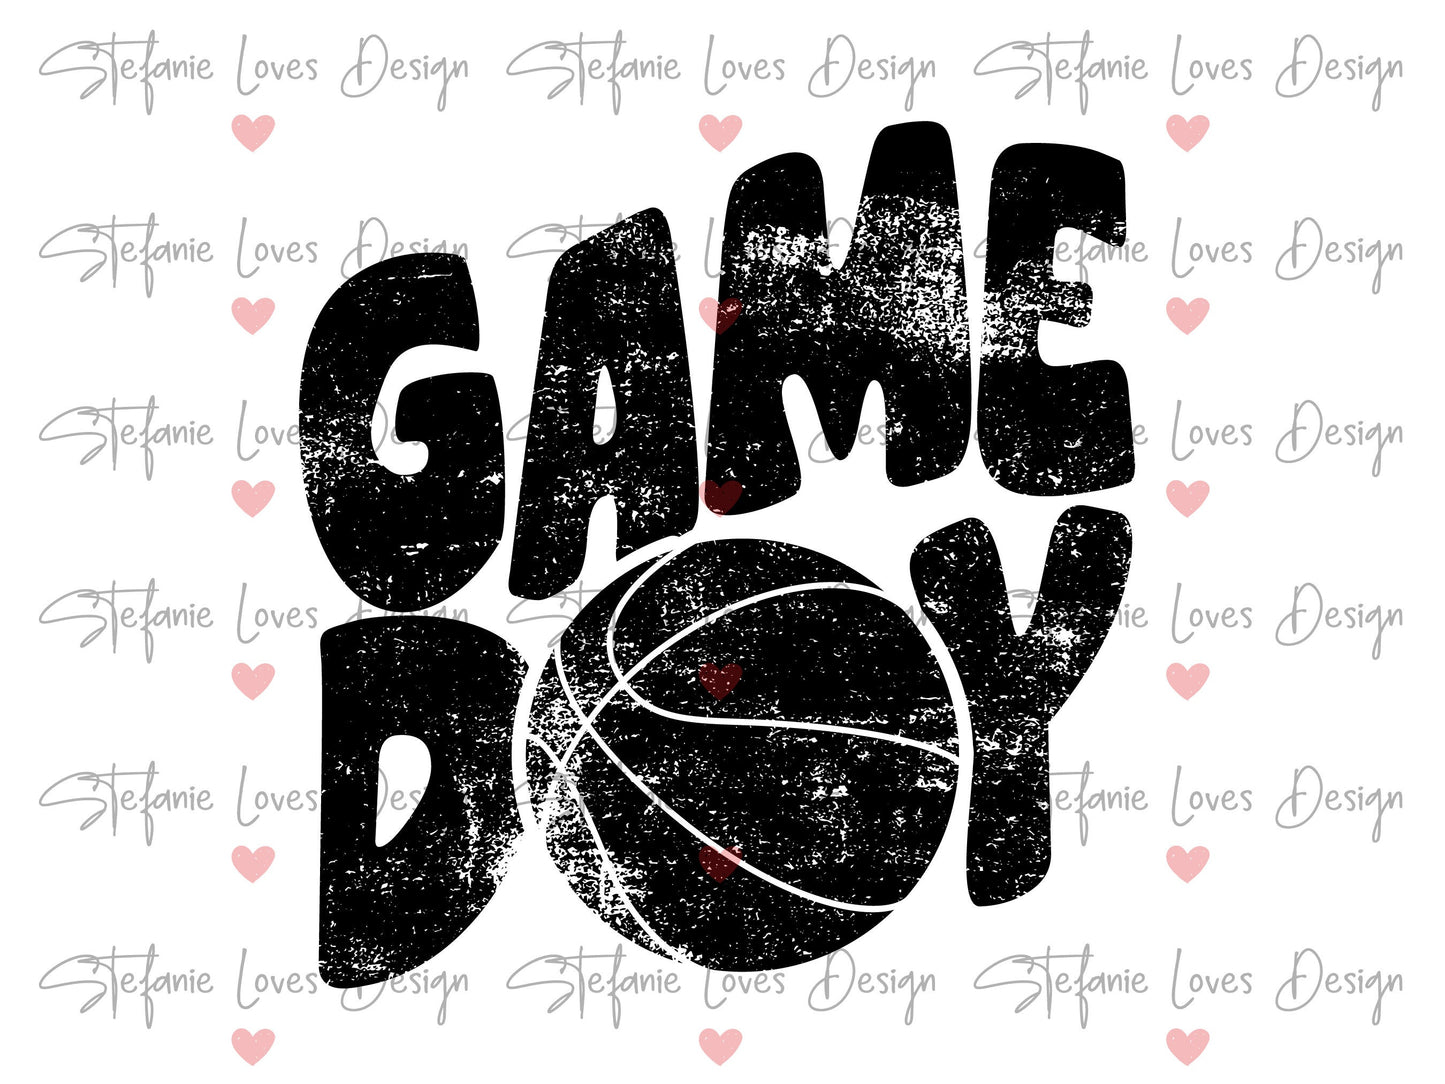 Game Day Basketball png, Distressed Game Day png, Basktball png, Sports png, Digital Design